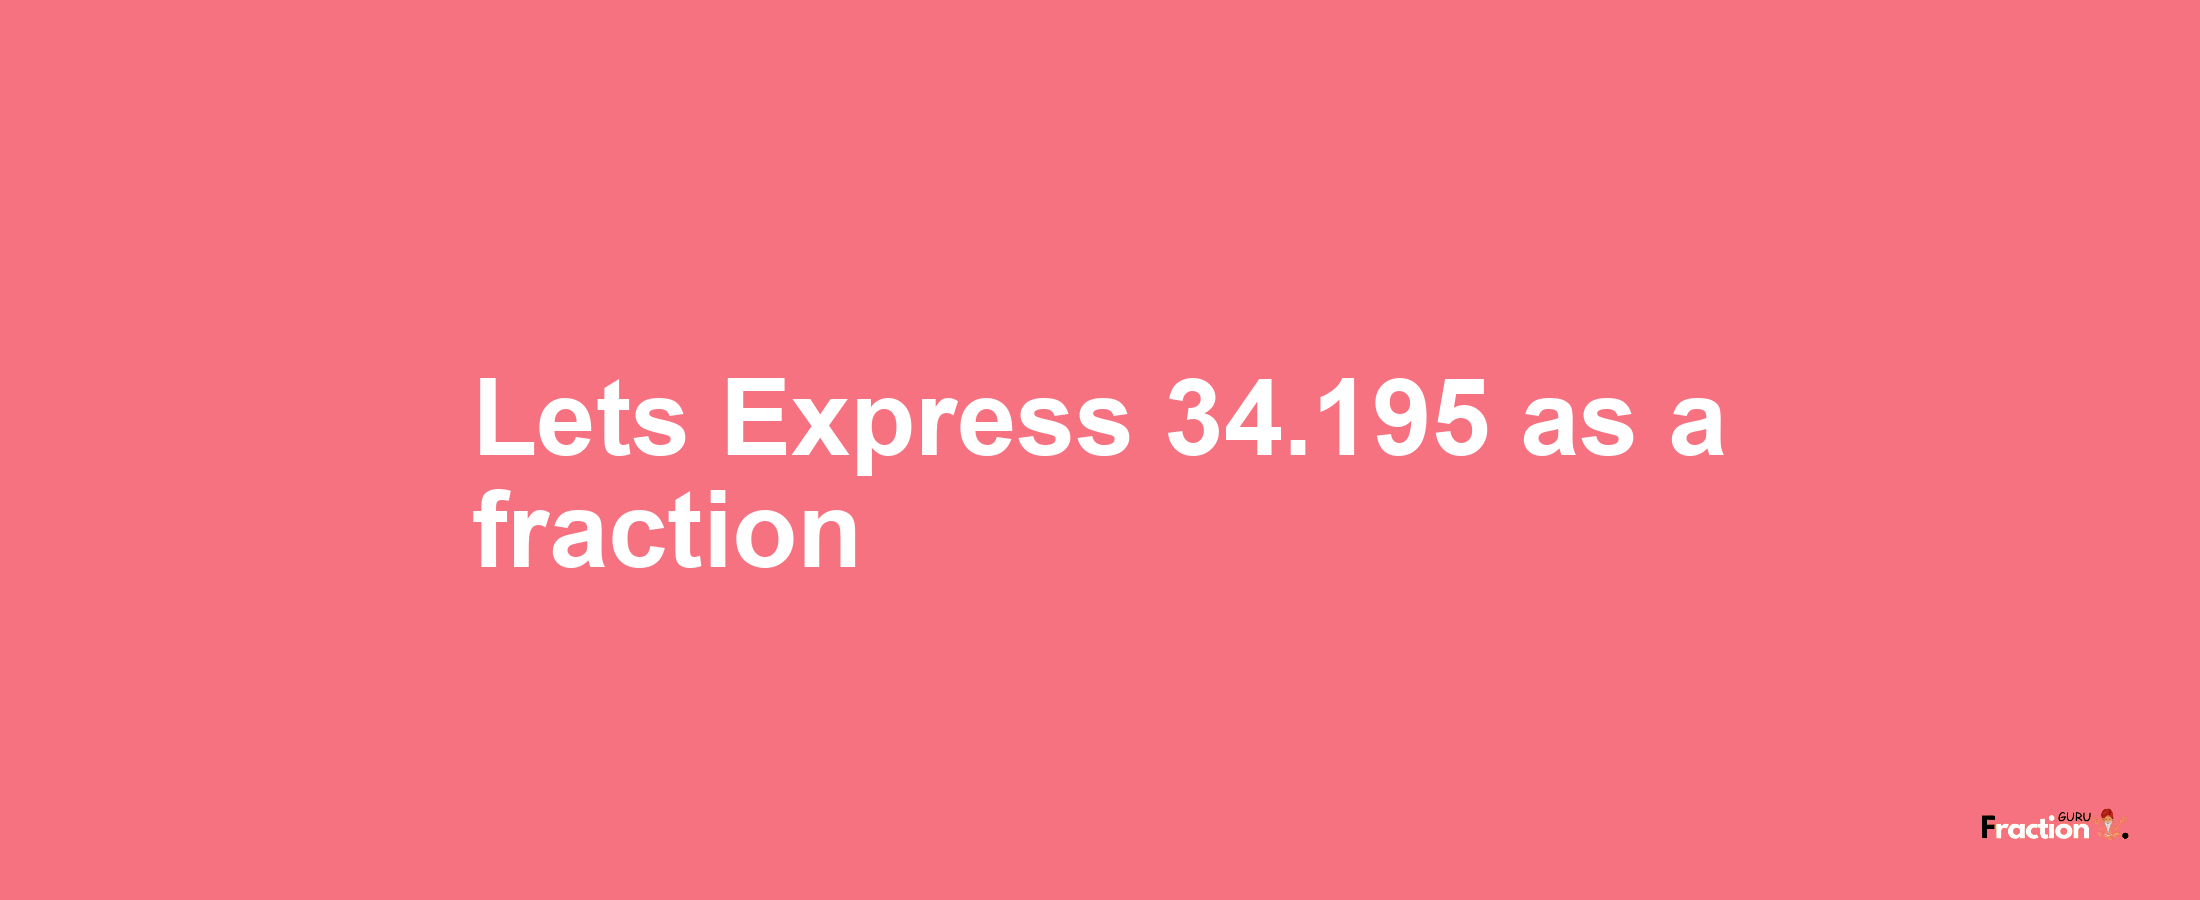 Lets Express 34.195 as afraction